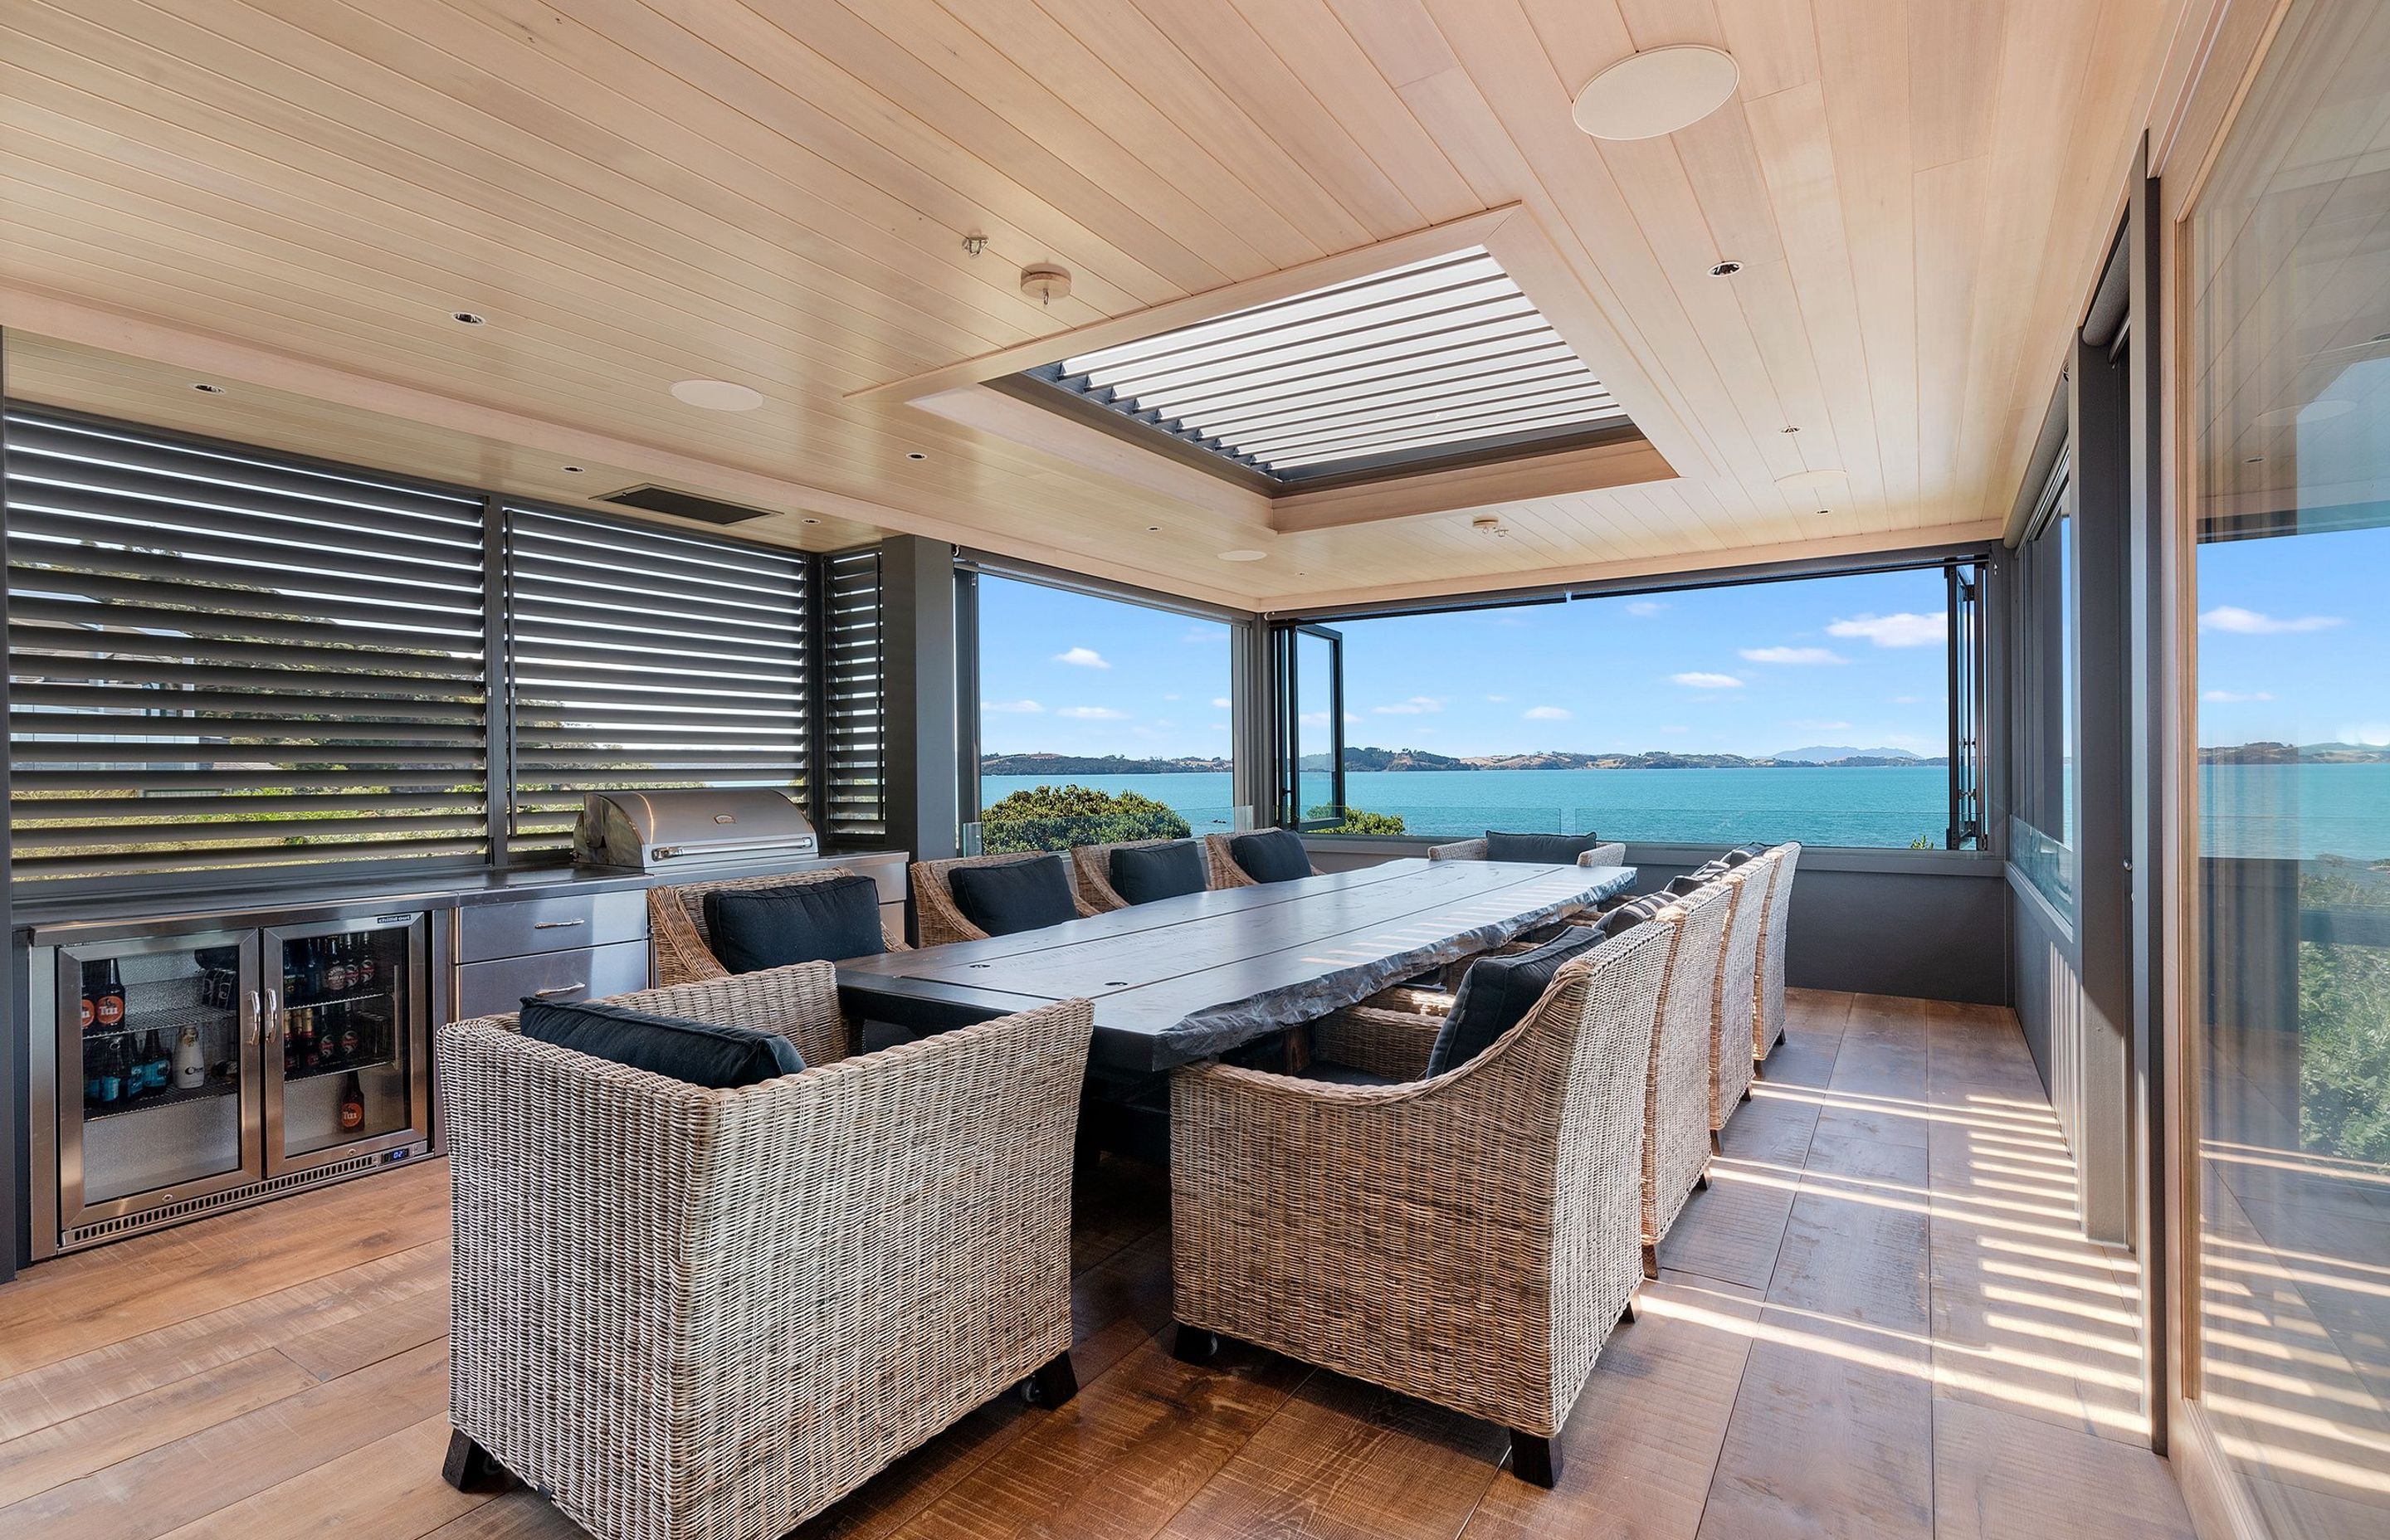 Tongue-and-groove paneling was chosen for the ceiling of the outdoor room to complement the 5000-year-old swamp kauri ‘shuffleboard’ dining table.